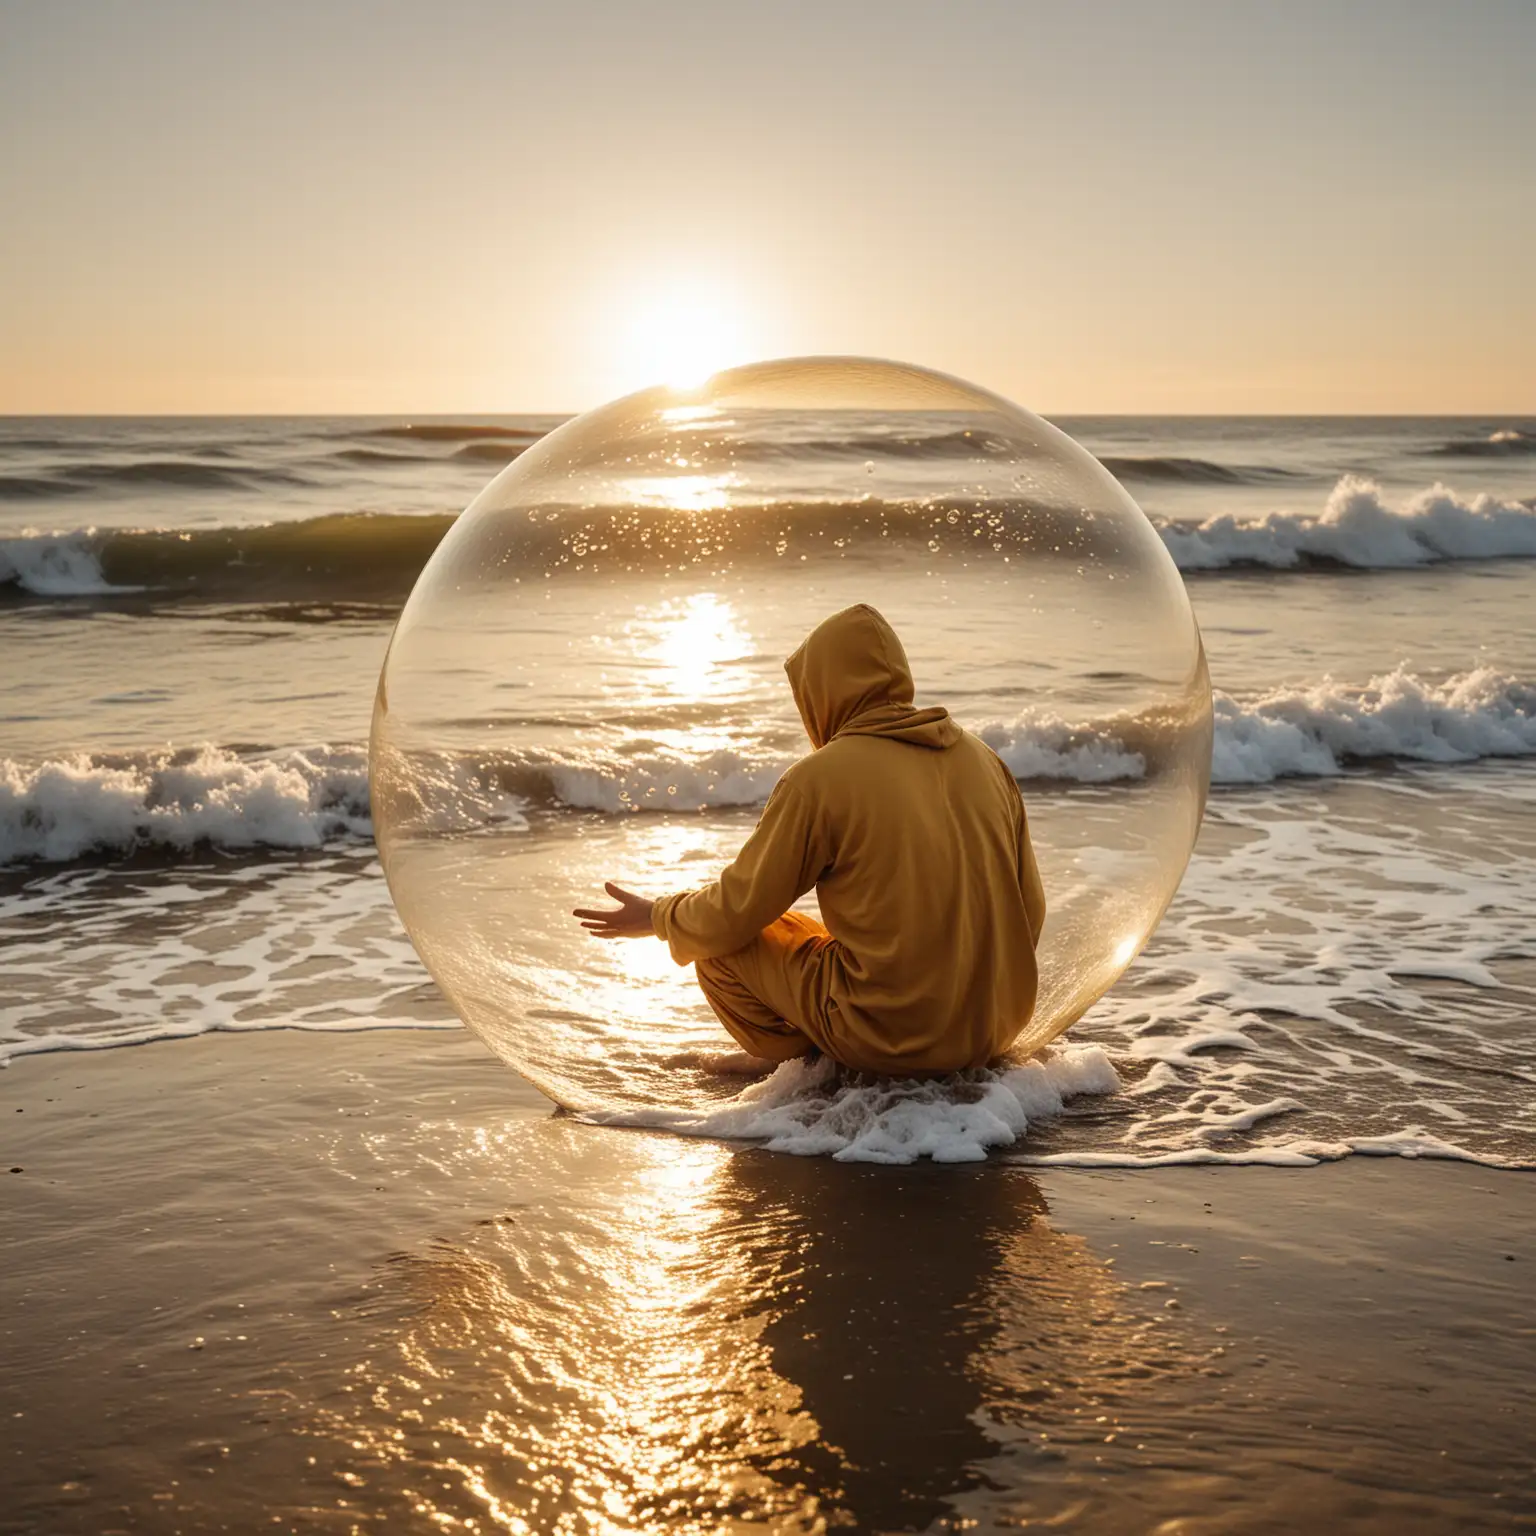 Near the seashore, there is a man wearing a golden cotton tunic and a hoodie. The man's face is not visible.He is kneeling down and observing his reflection on a large, golden transparent bubble made from the foam of the waves. His hand is reaching out gently to touch the bubble.